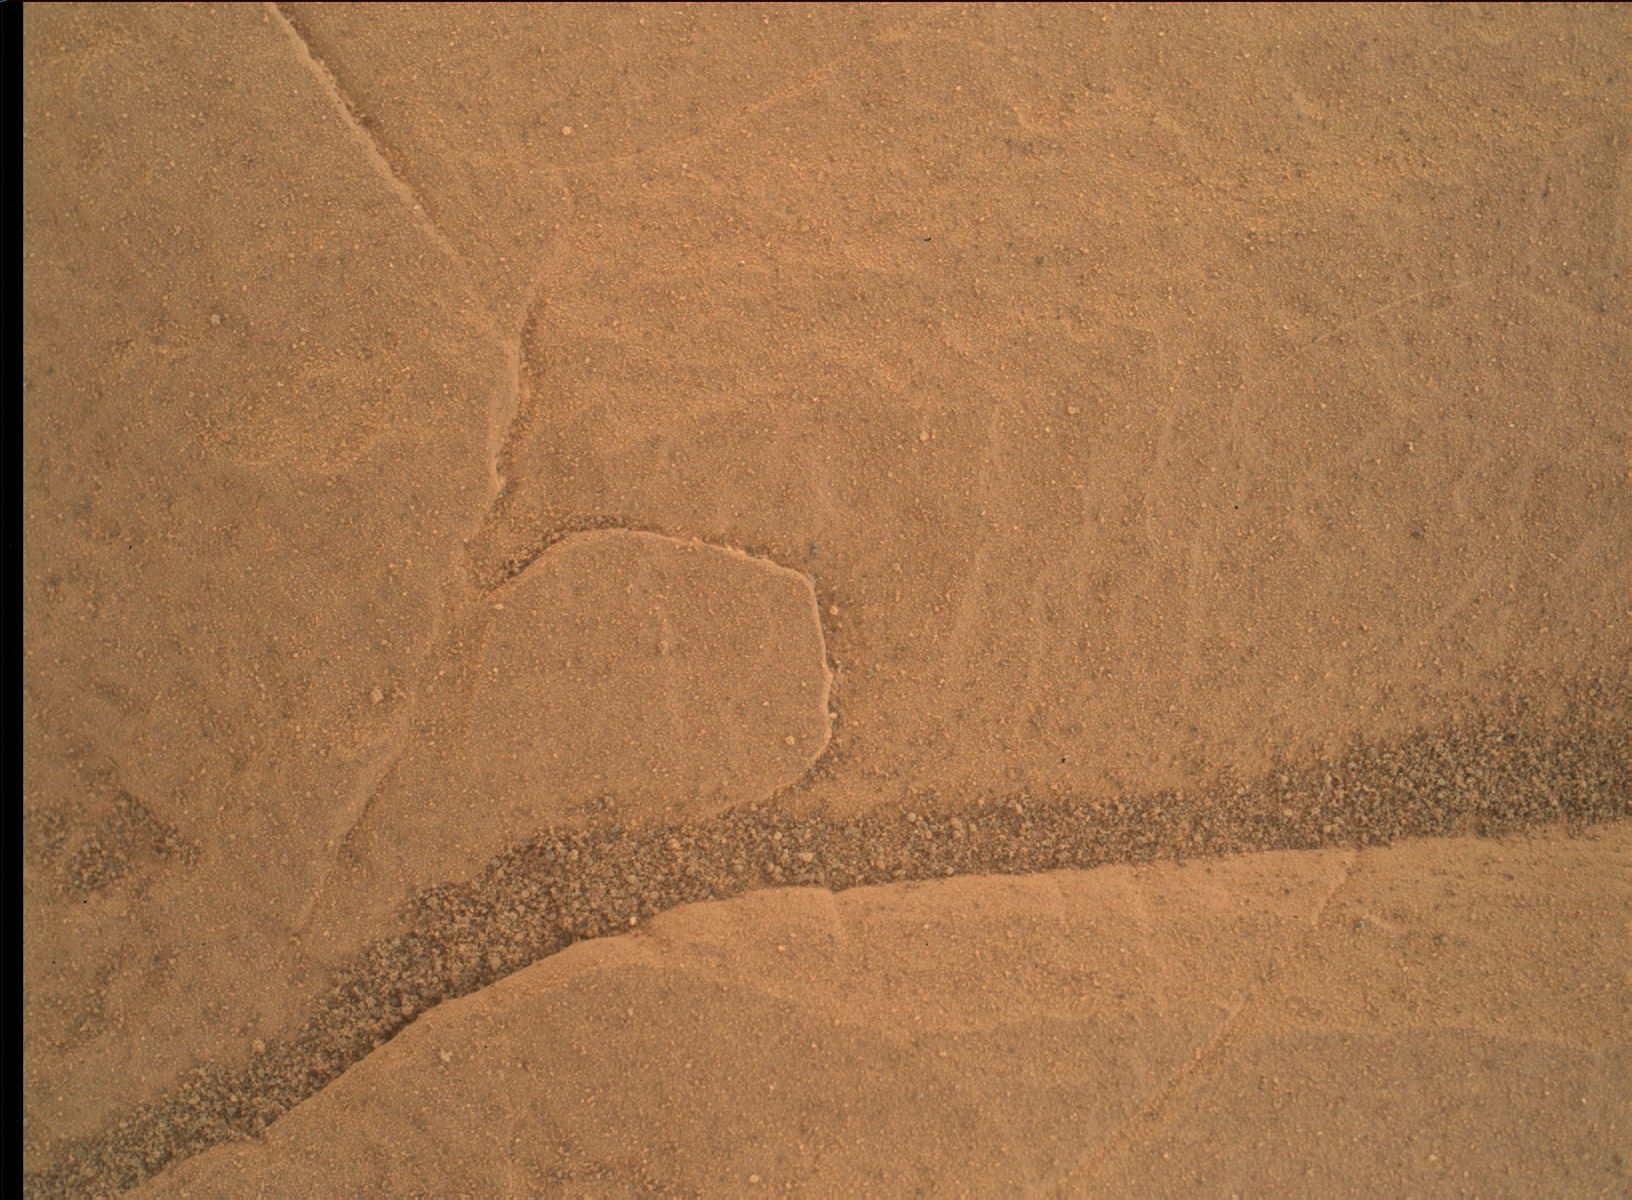 Nasa's Mars rover Curiosity acquired this image using its Mars Hand Lens Imager (MAHLI) on Sol 1814